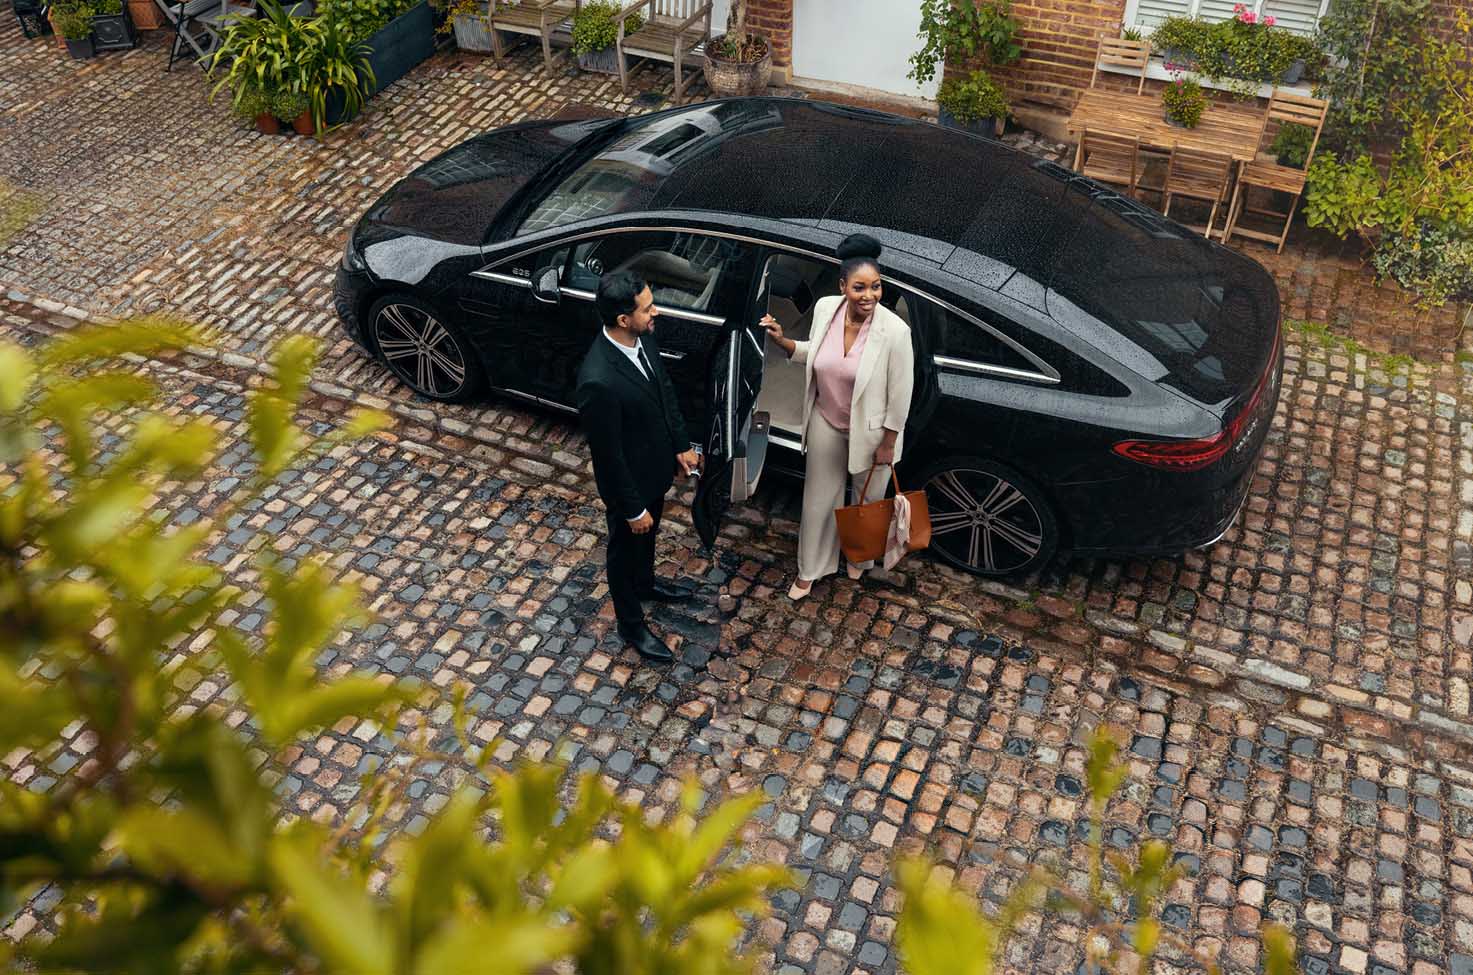 Blacklane Private Chauffeur Service driver opening door for a passenger to get out of a black luxury sedan vehicle